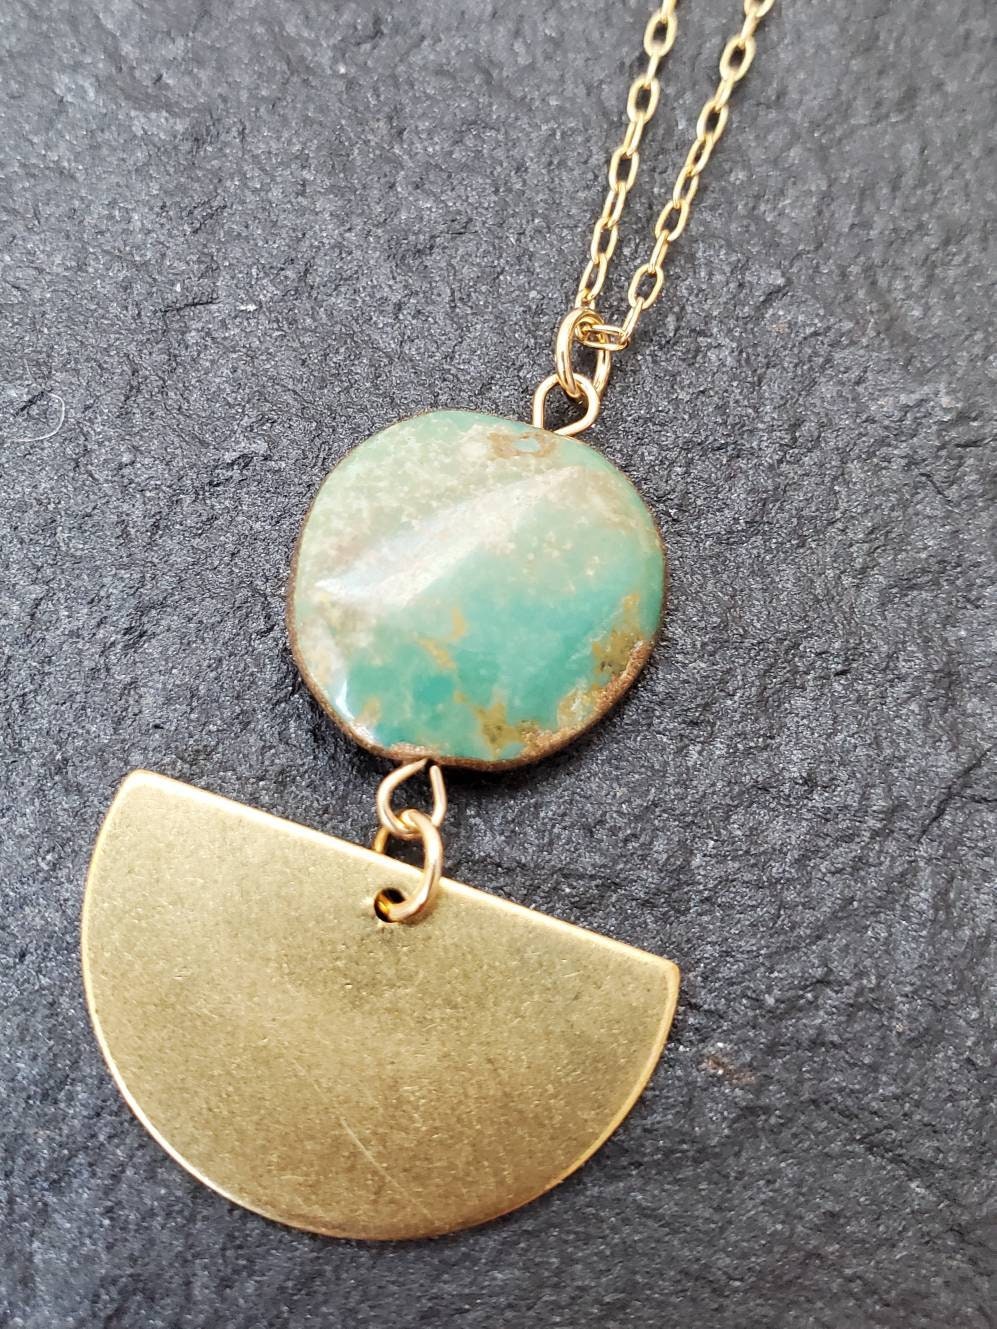 Turquoise Stone + Raw Brass Necklace; Round Turquoise Stone Necklace; Dainty Brass Crescent Half Moon Necklace; Real Genuine Turquoise